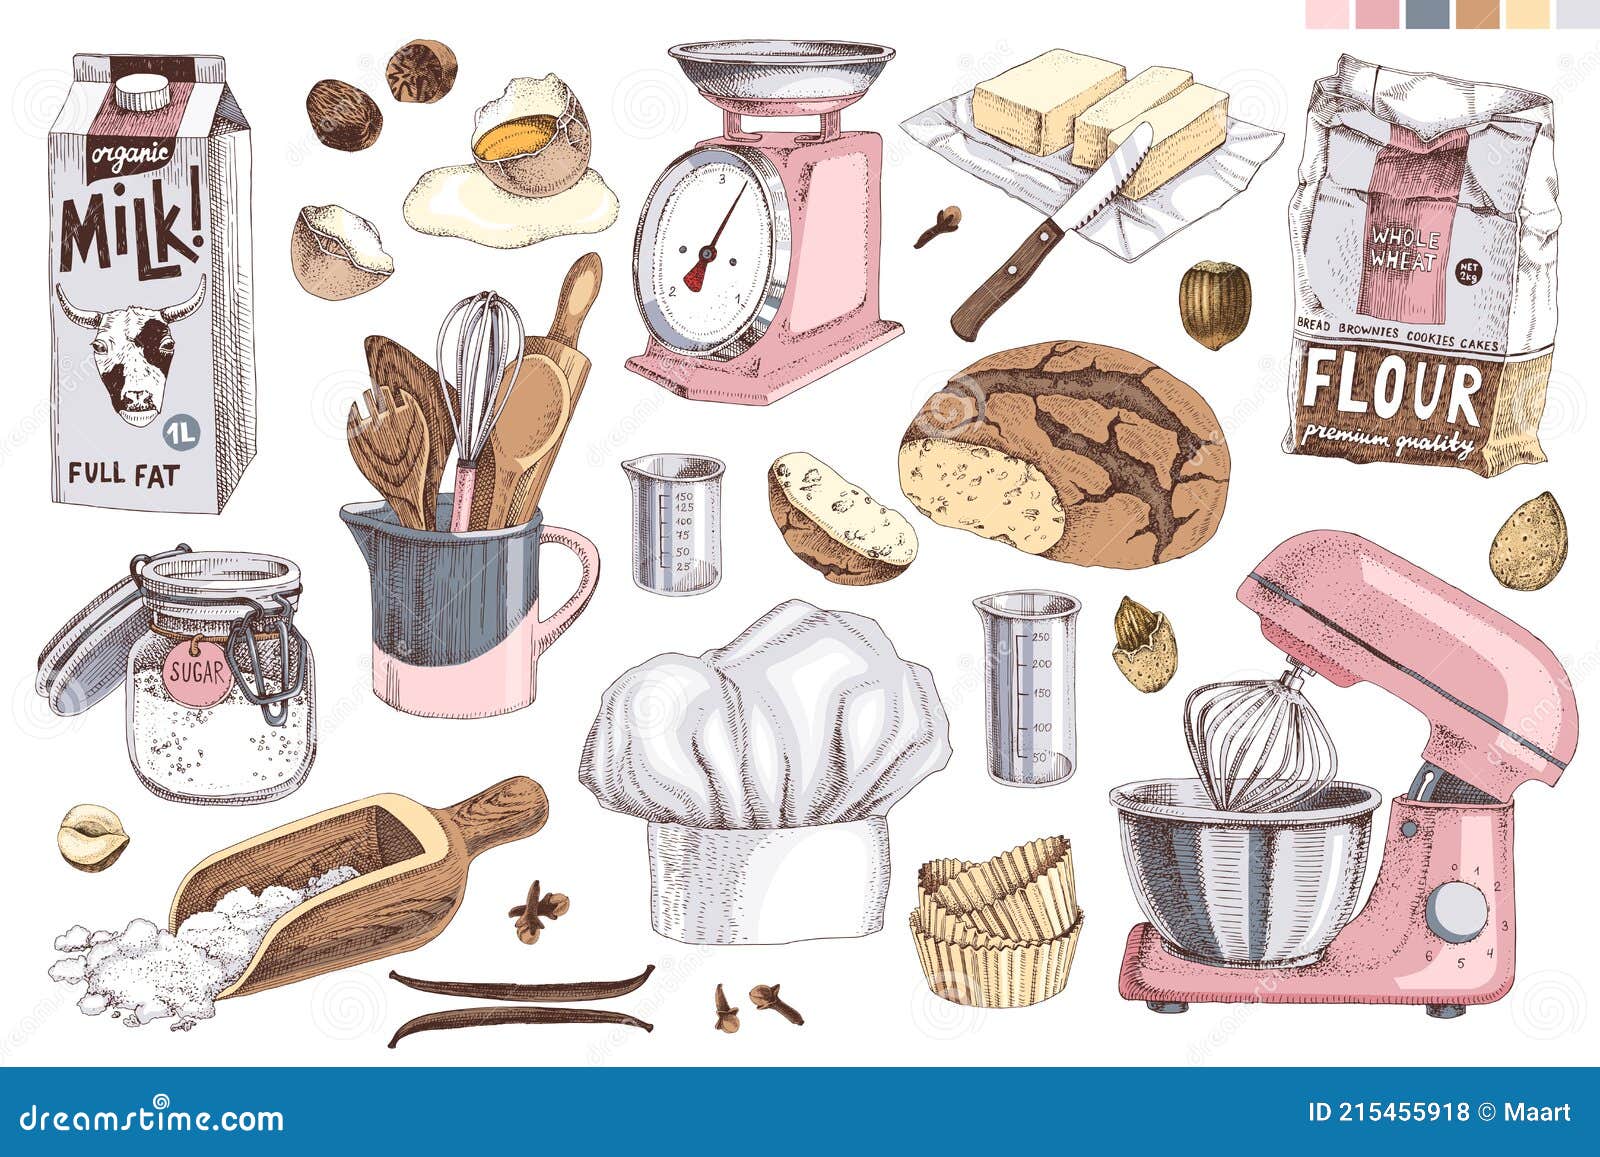 https://thumbs.dreamstime.com/z/kitchen-tools-ingredients-set-baking-bakery-pastry-stuff-equipment-cooking-hand-drawn-vector-illustration-215455918.jpg